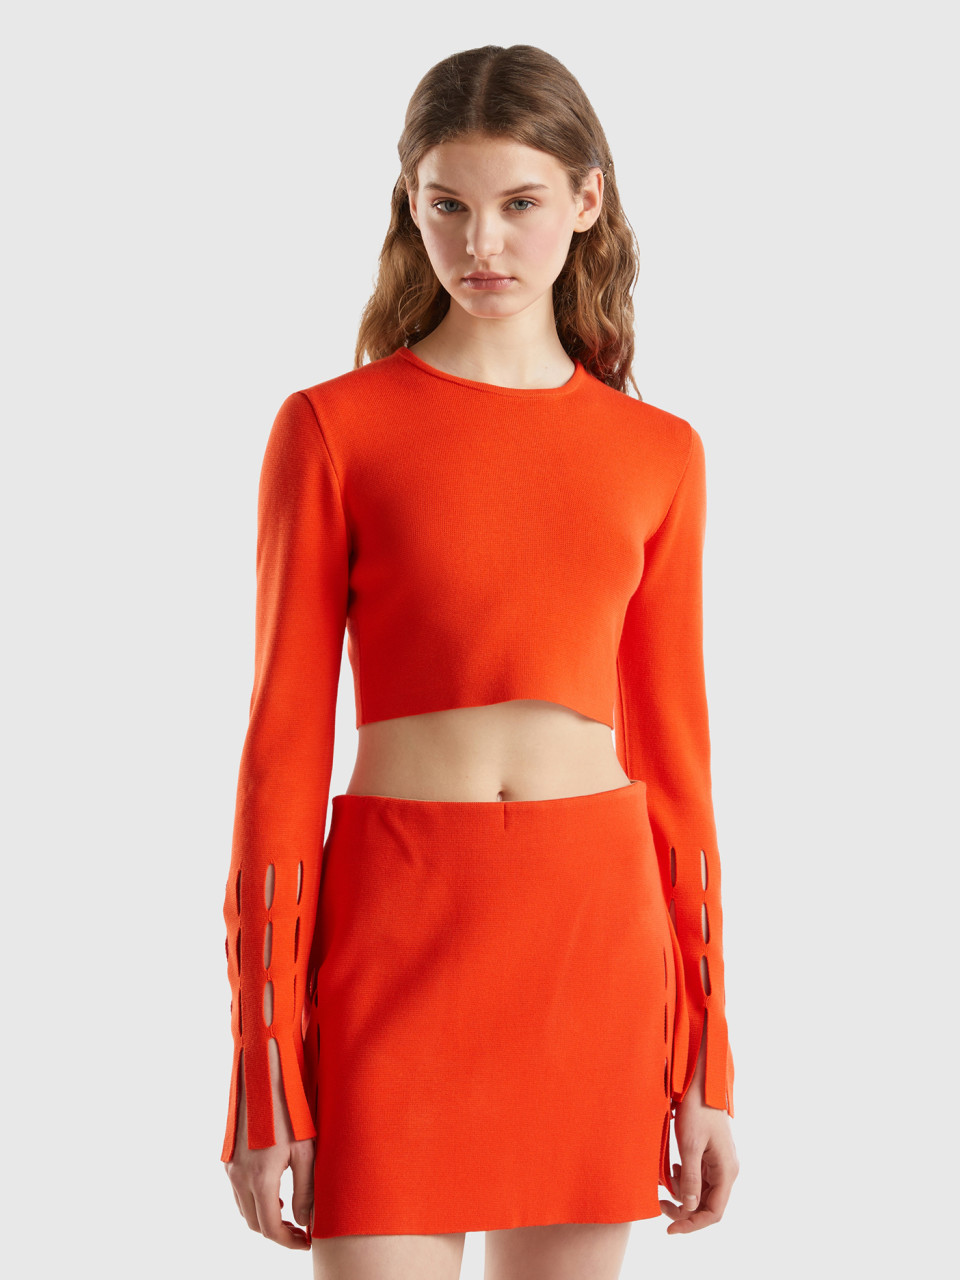 Benetton, Maglia Cut Out Cropped, Rosso, Donna